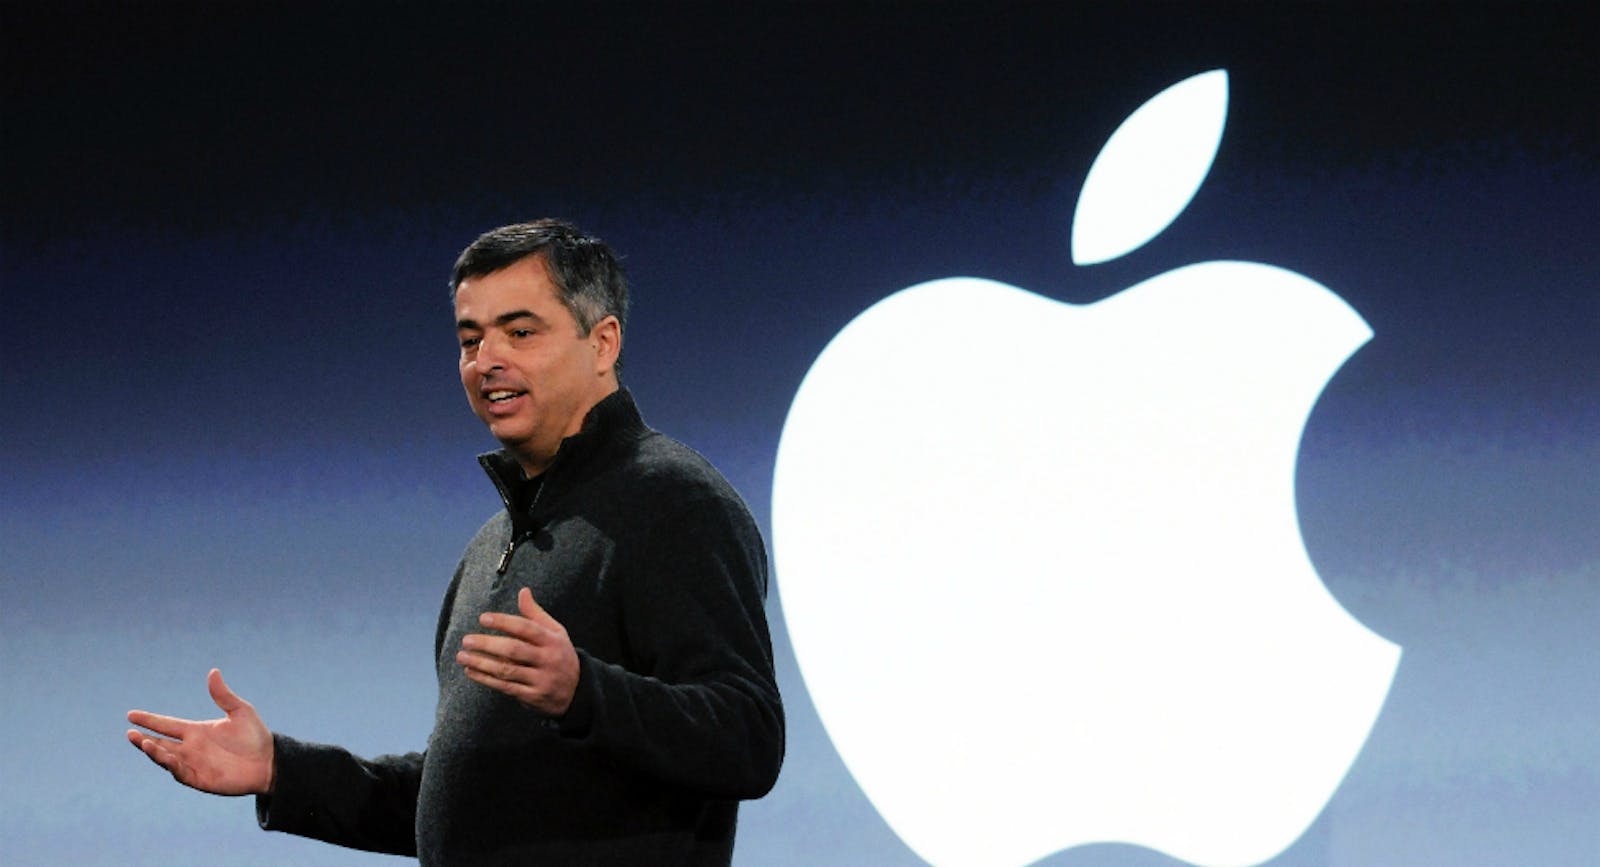 Apple senior vice president and music honcho Eddy Cue. Photo by Bloomberg.